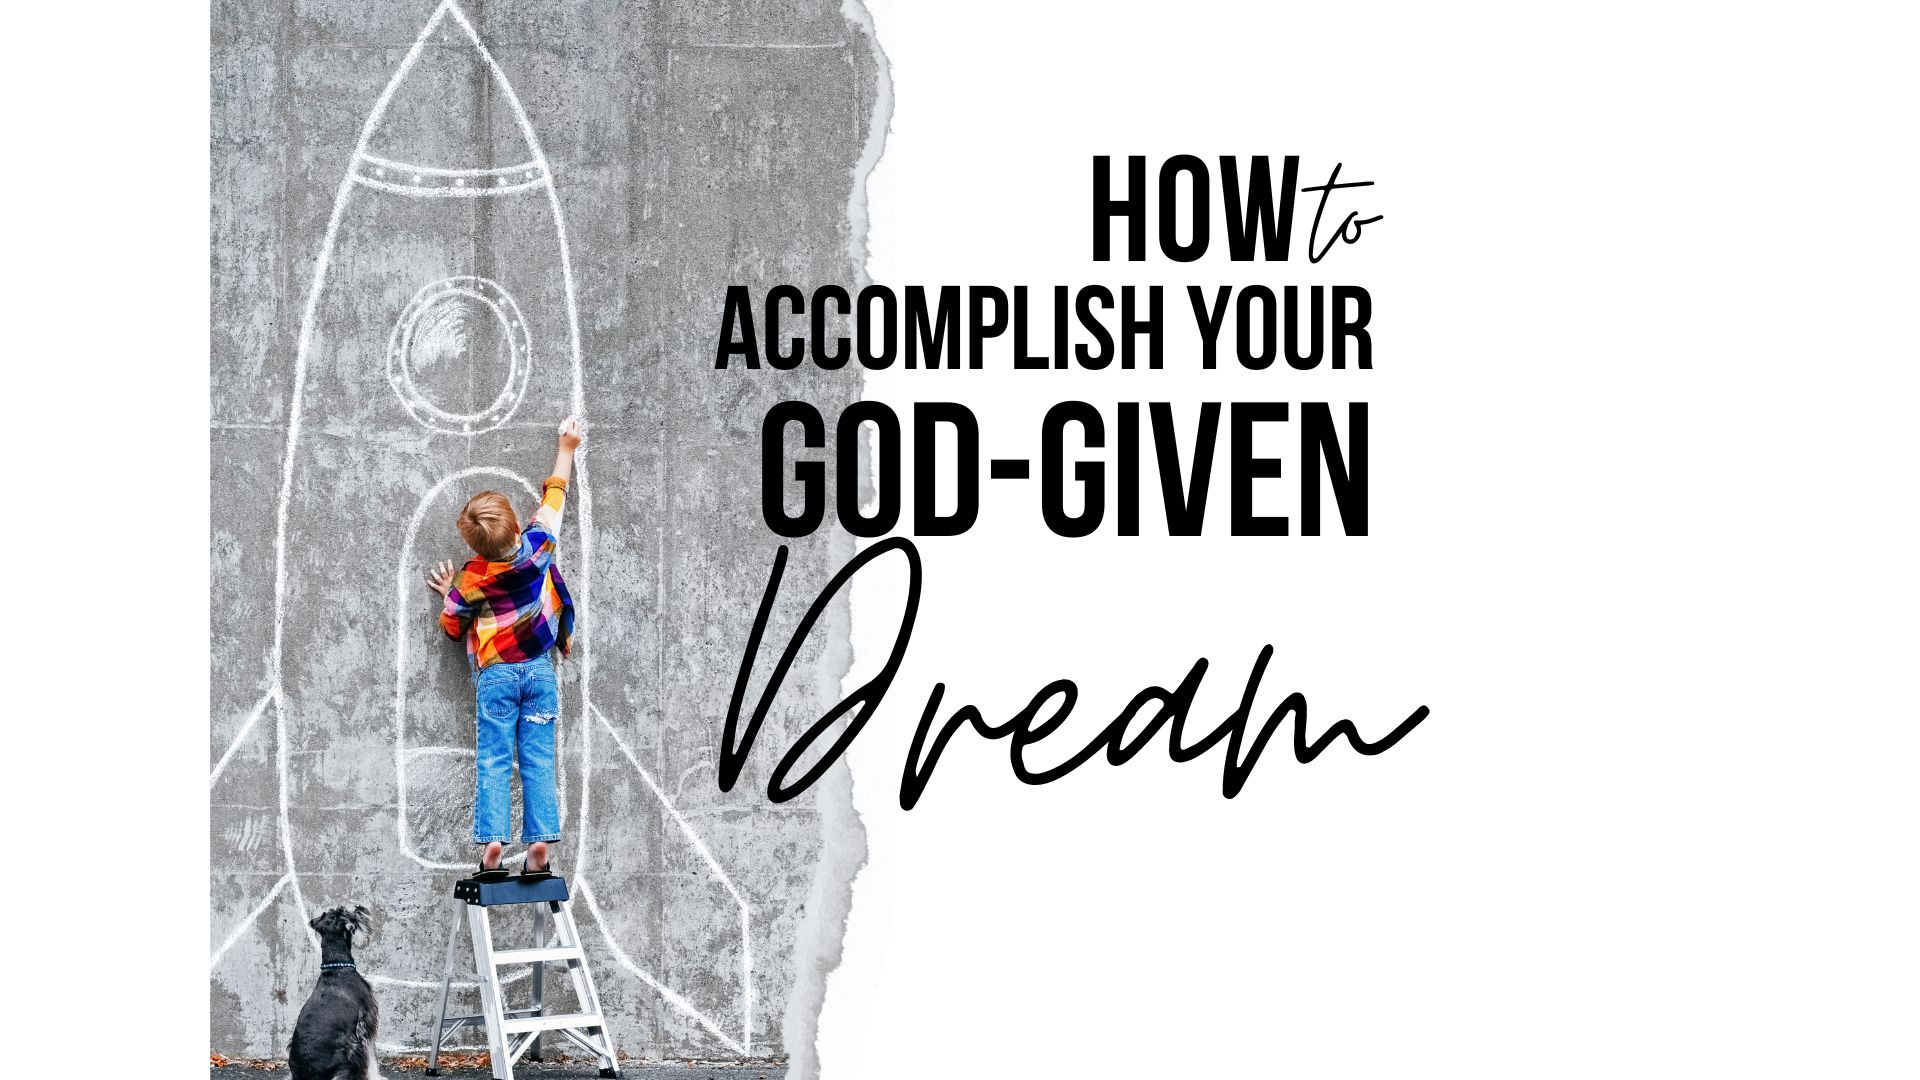 HOW TO ACCOMPLISH YOUR GOD-GIVEN DREAM with Pastor Gary Crawford